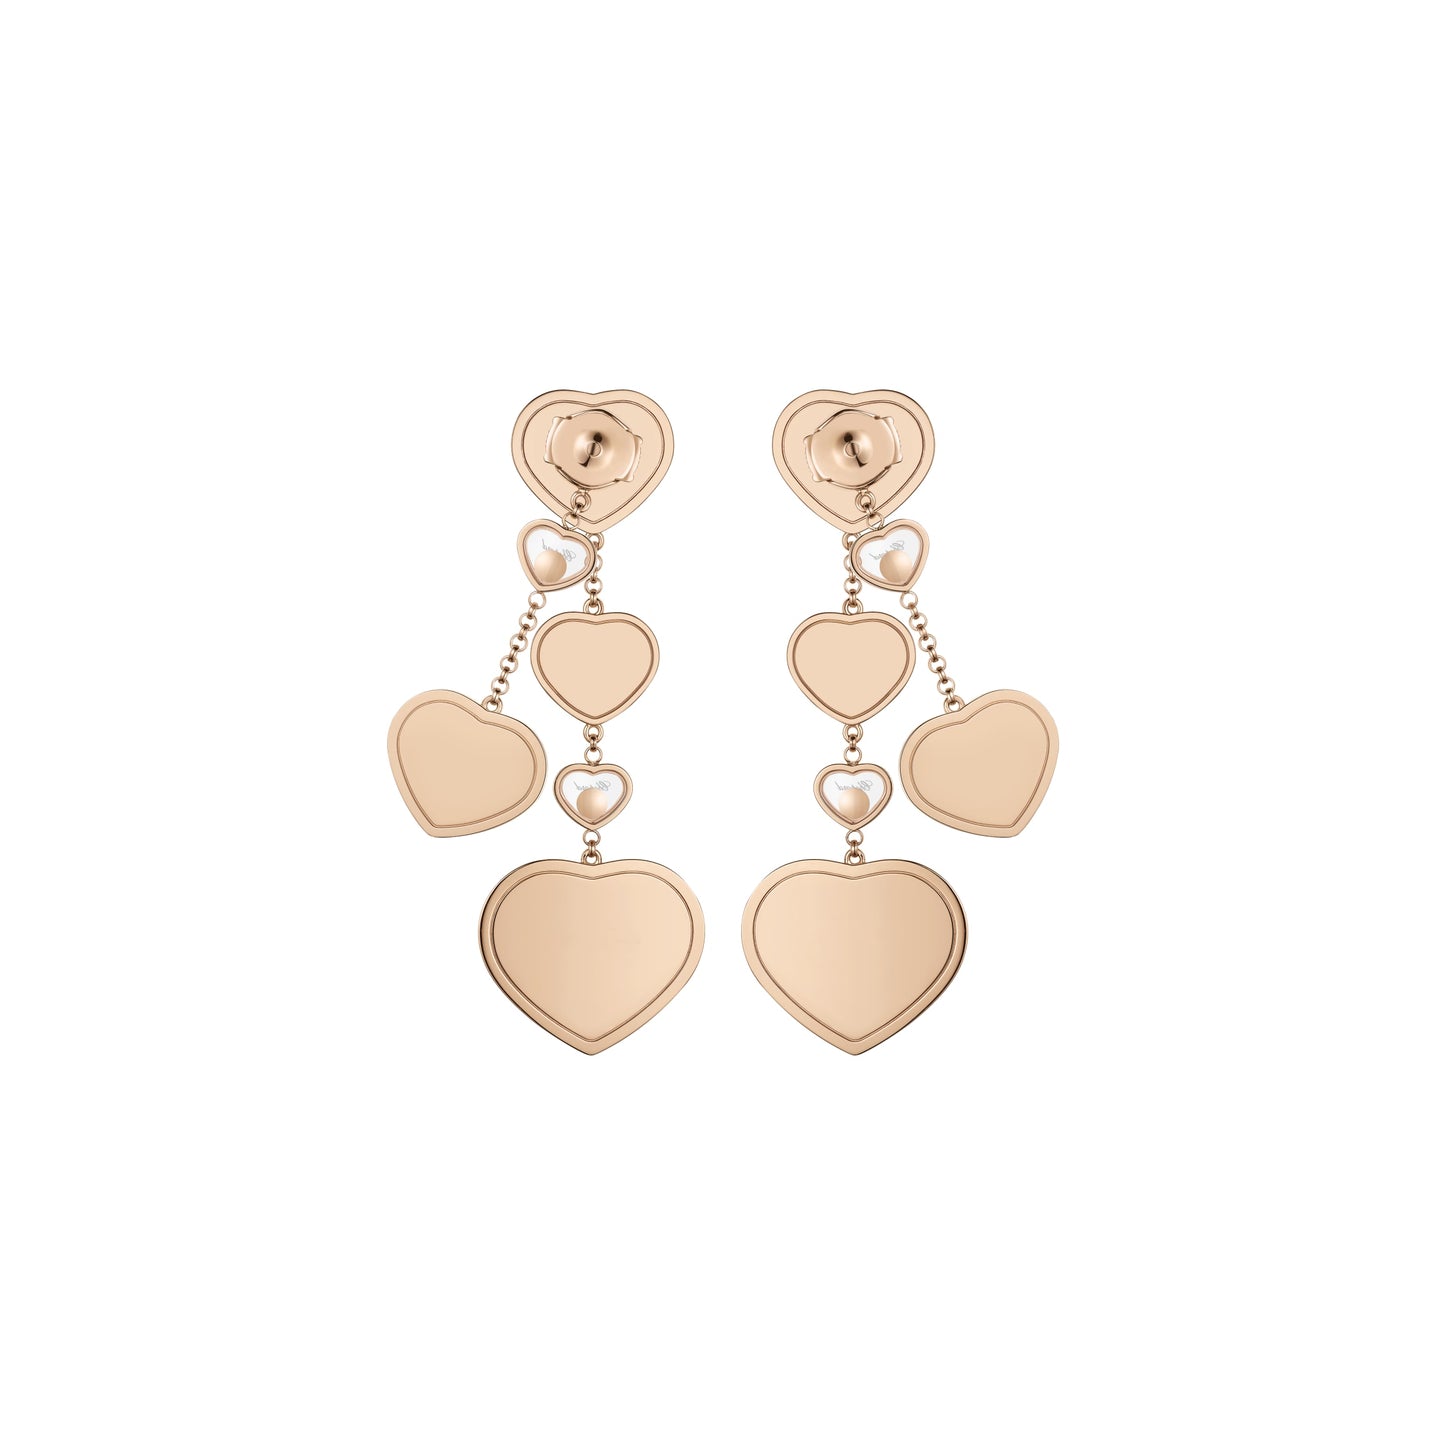 HAPPY HEARTS GOLDEN HEARTS EARRINGS, ETHICAL ROSE GOLD, DIAMONDS 83A707-5029